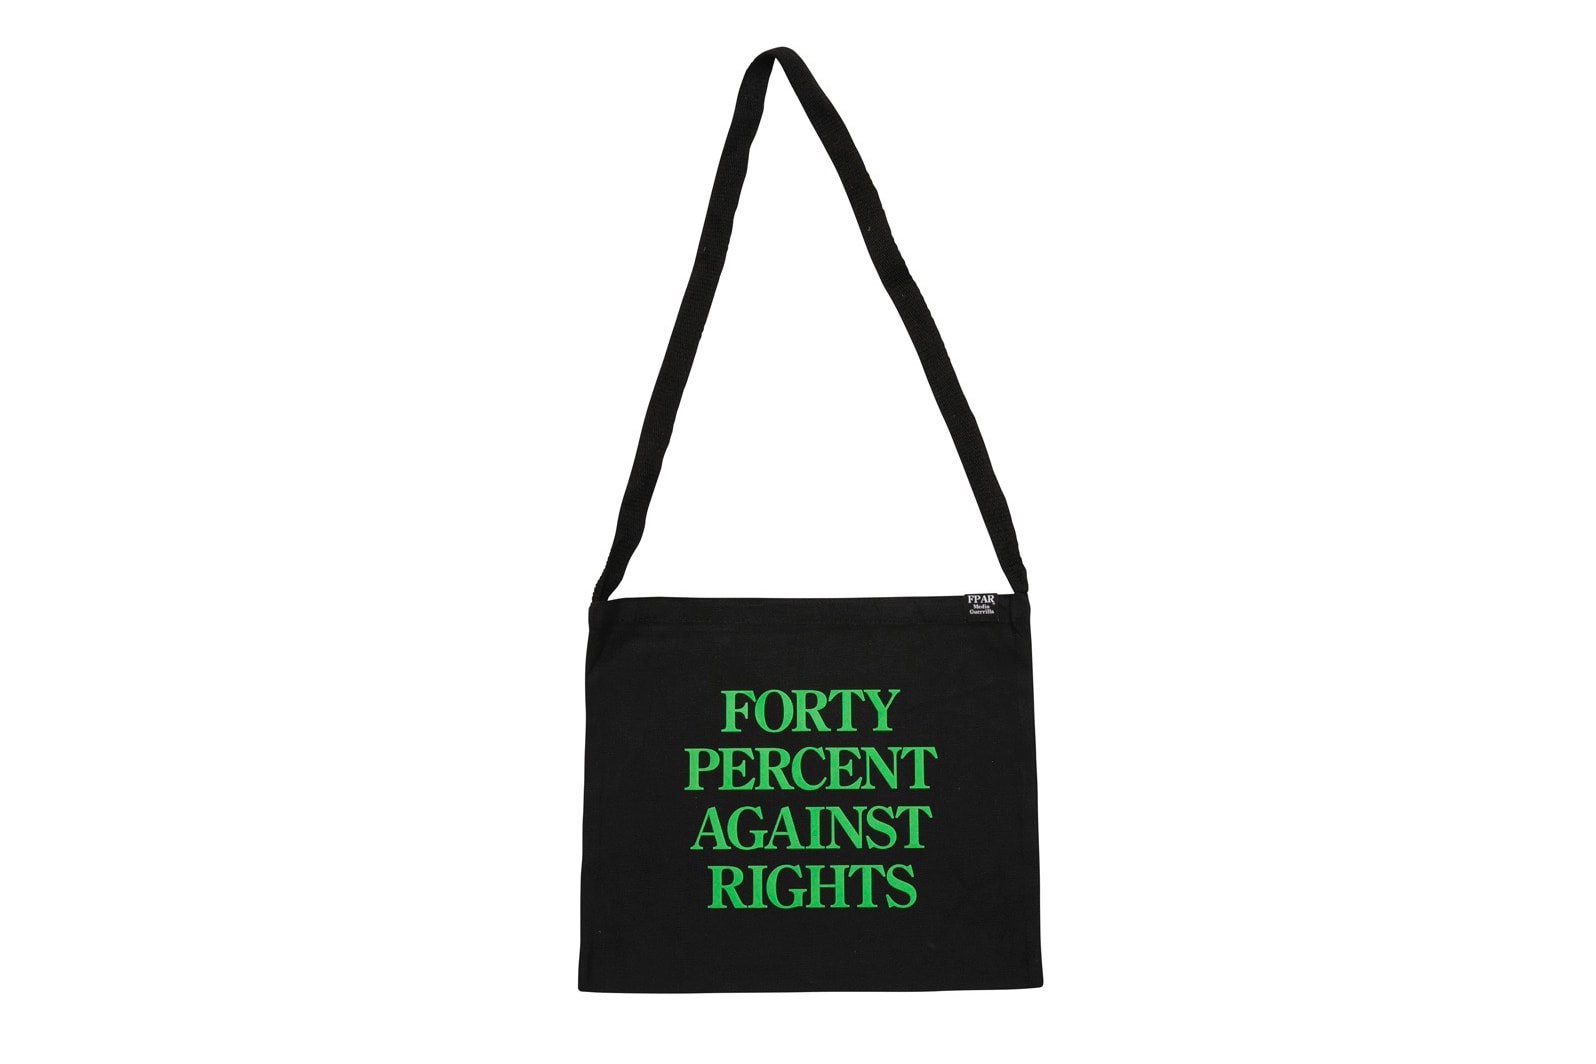 FPAR FORTY PERCENTS AGAINST RIGHTS Release First Spring/Summer 2018 Drop